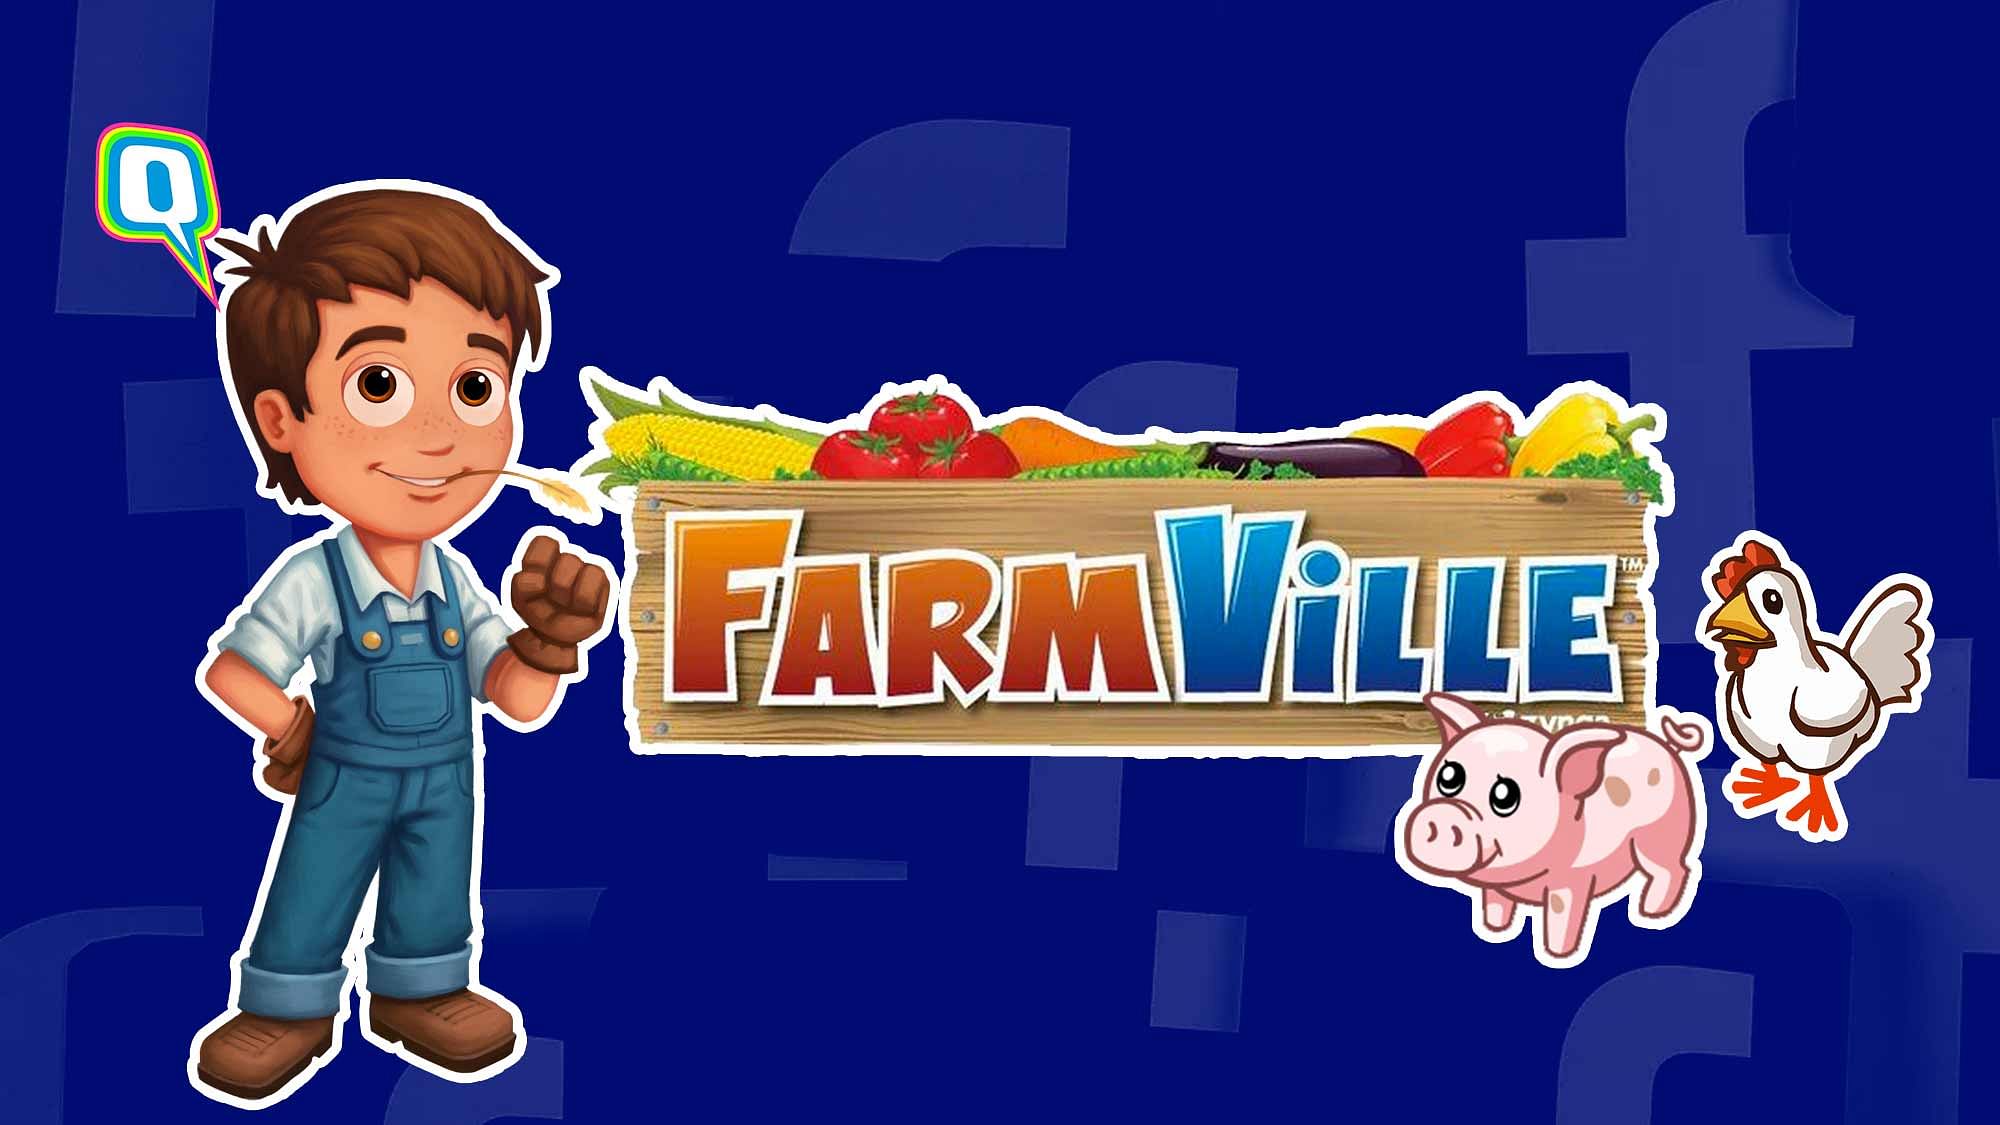 The end of FarmVille marks the end of an era.